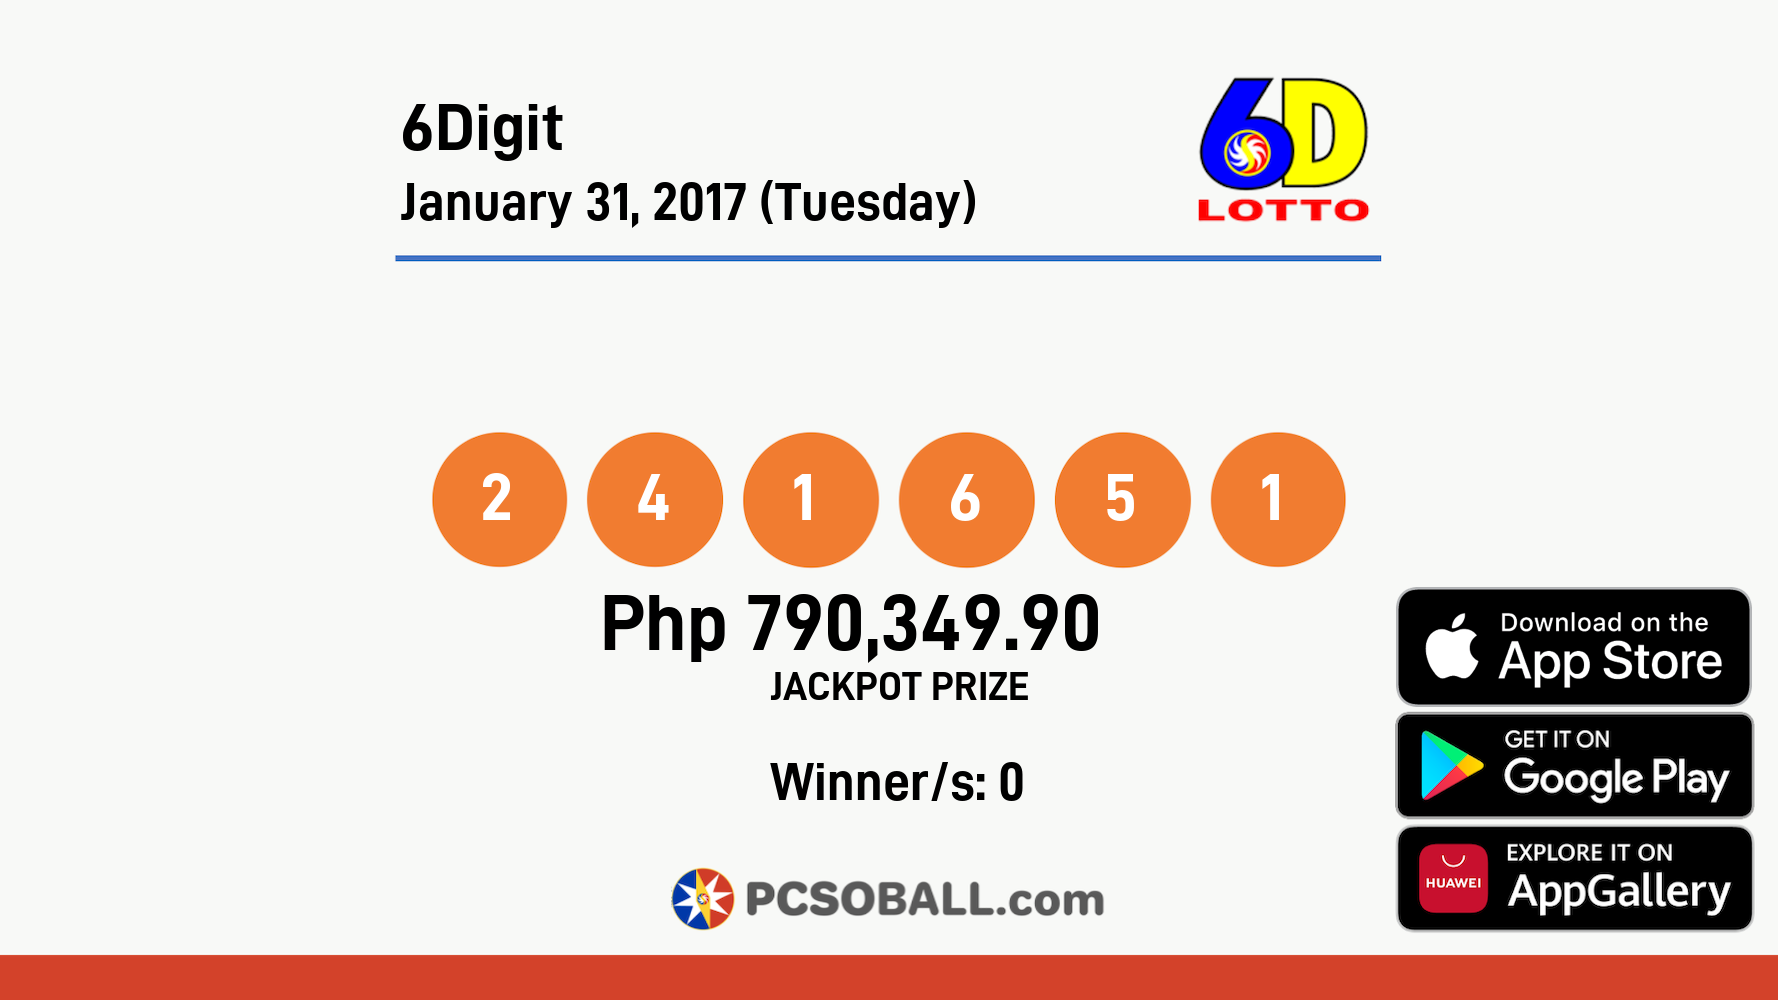 6Digit January 31, 2017 (Tuesday) Result